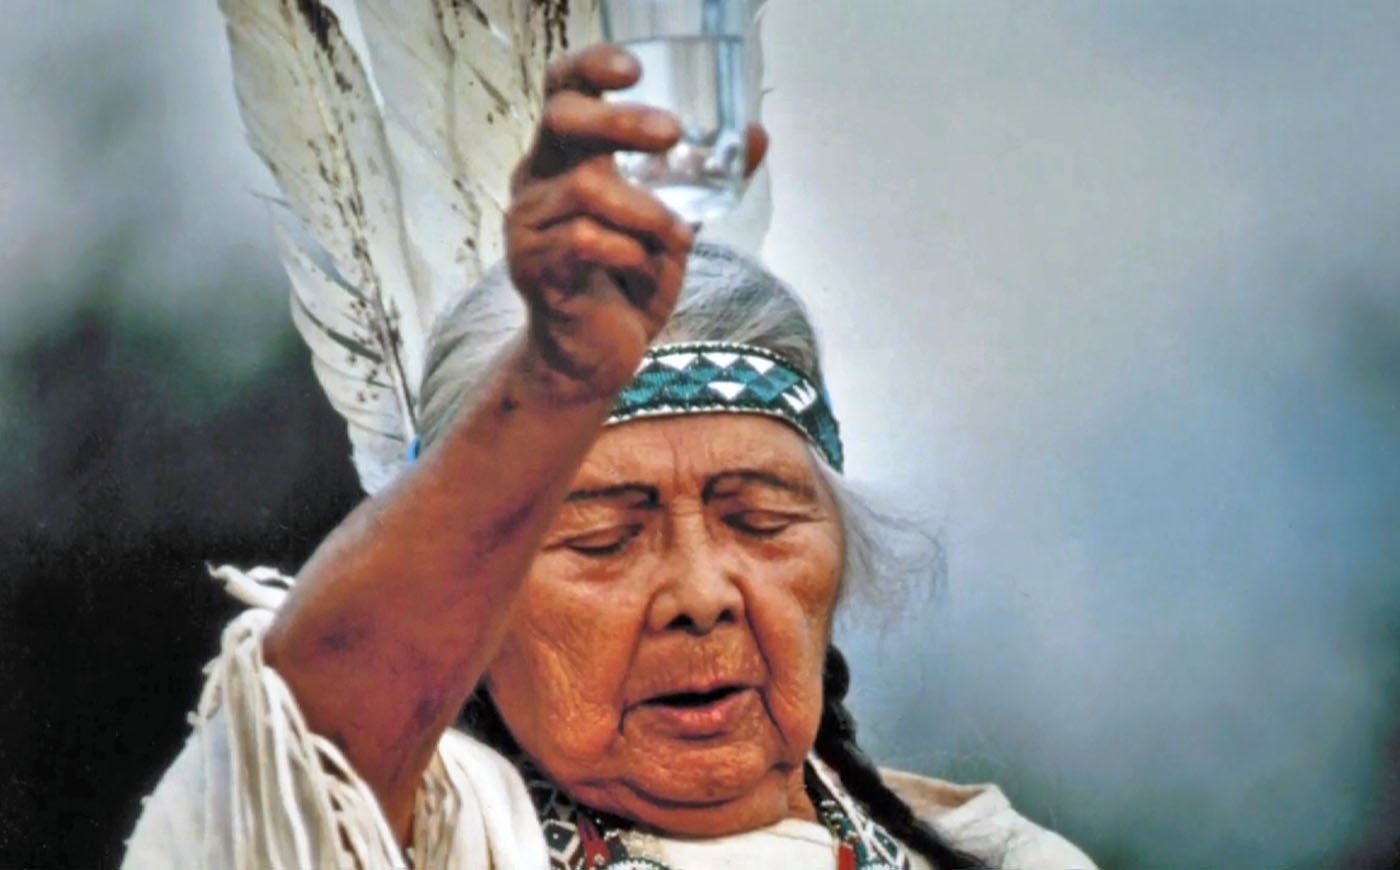  Florence Jones was respected as a healer and spiritual leader by indigenous people all over California. She helped train Chief Caleen Sisk to preserve the old ways for the next generations of Winnemem Wintu. Photo courtesy of Will Doolittle.  